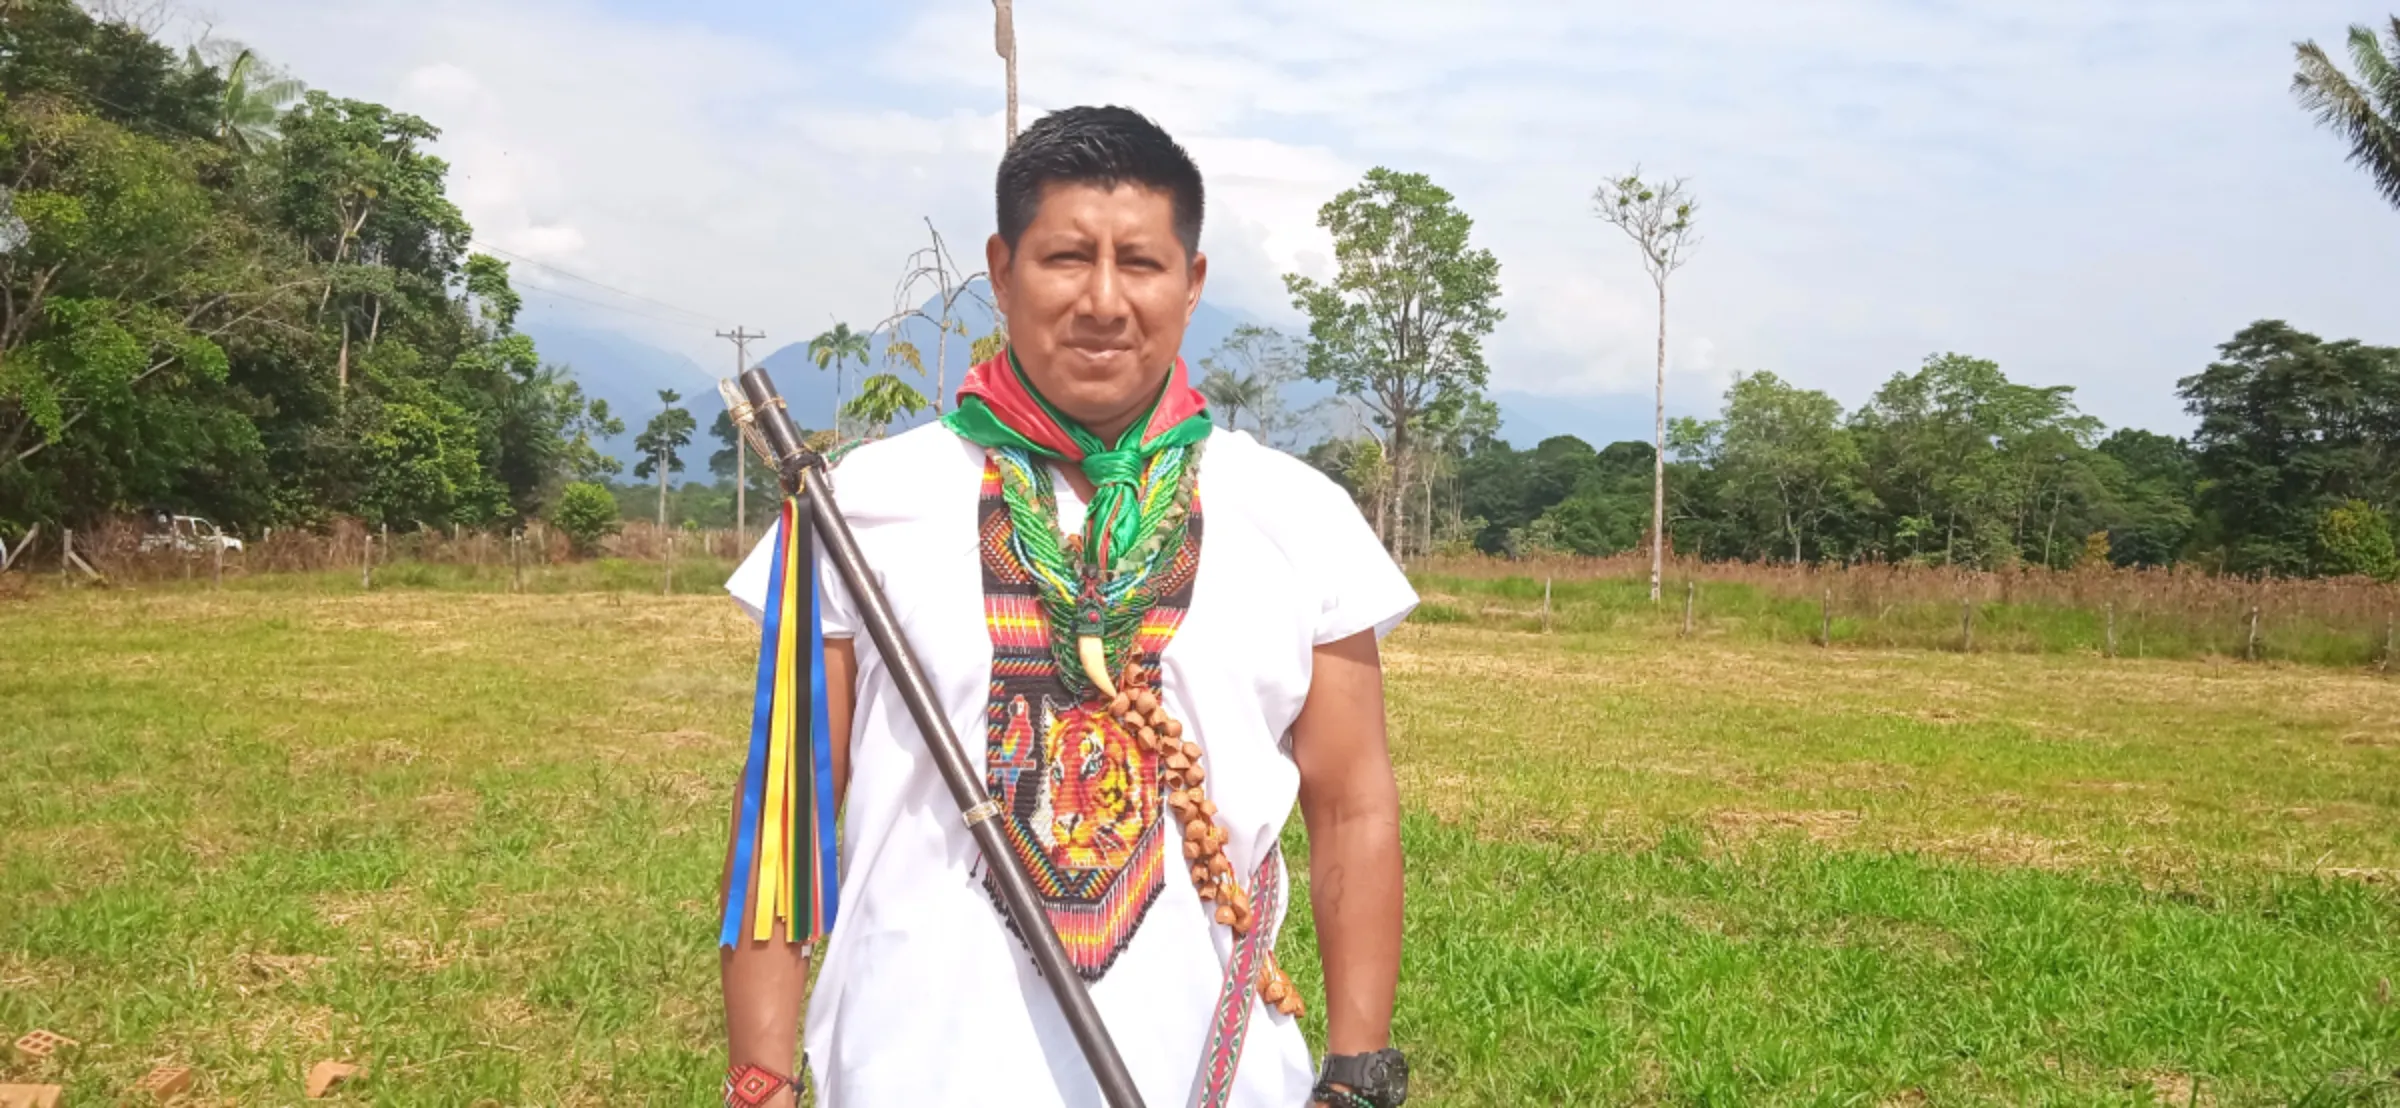 Jose Jansa, a governor of the Inga indigenous people, standing in a rural area in the province of Putumayo, Colombia. February 2, 2023